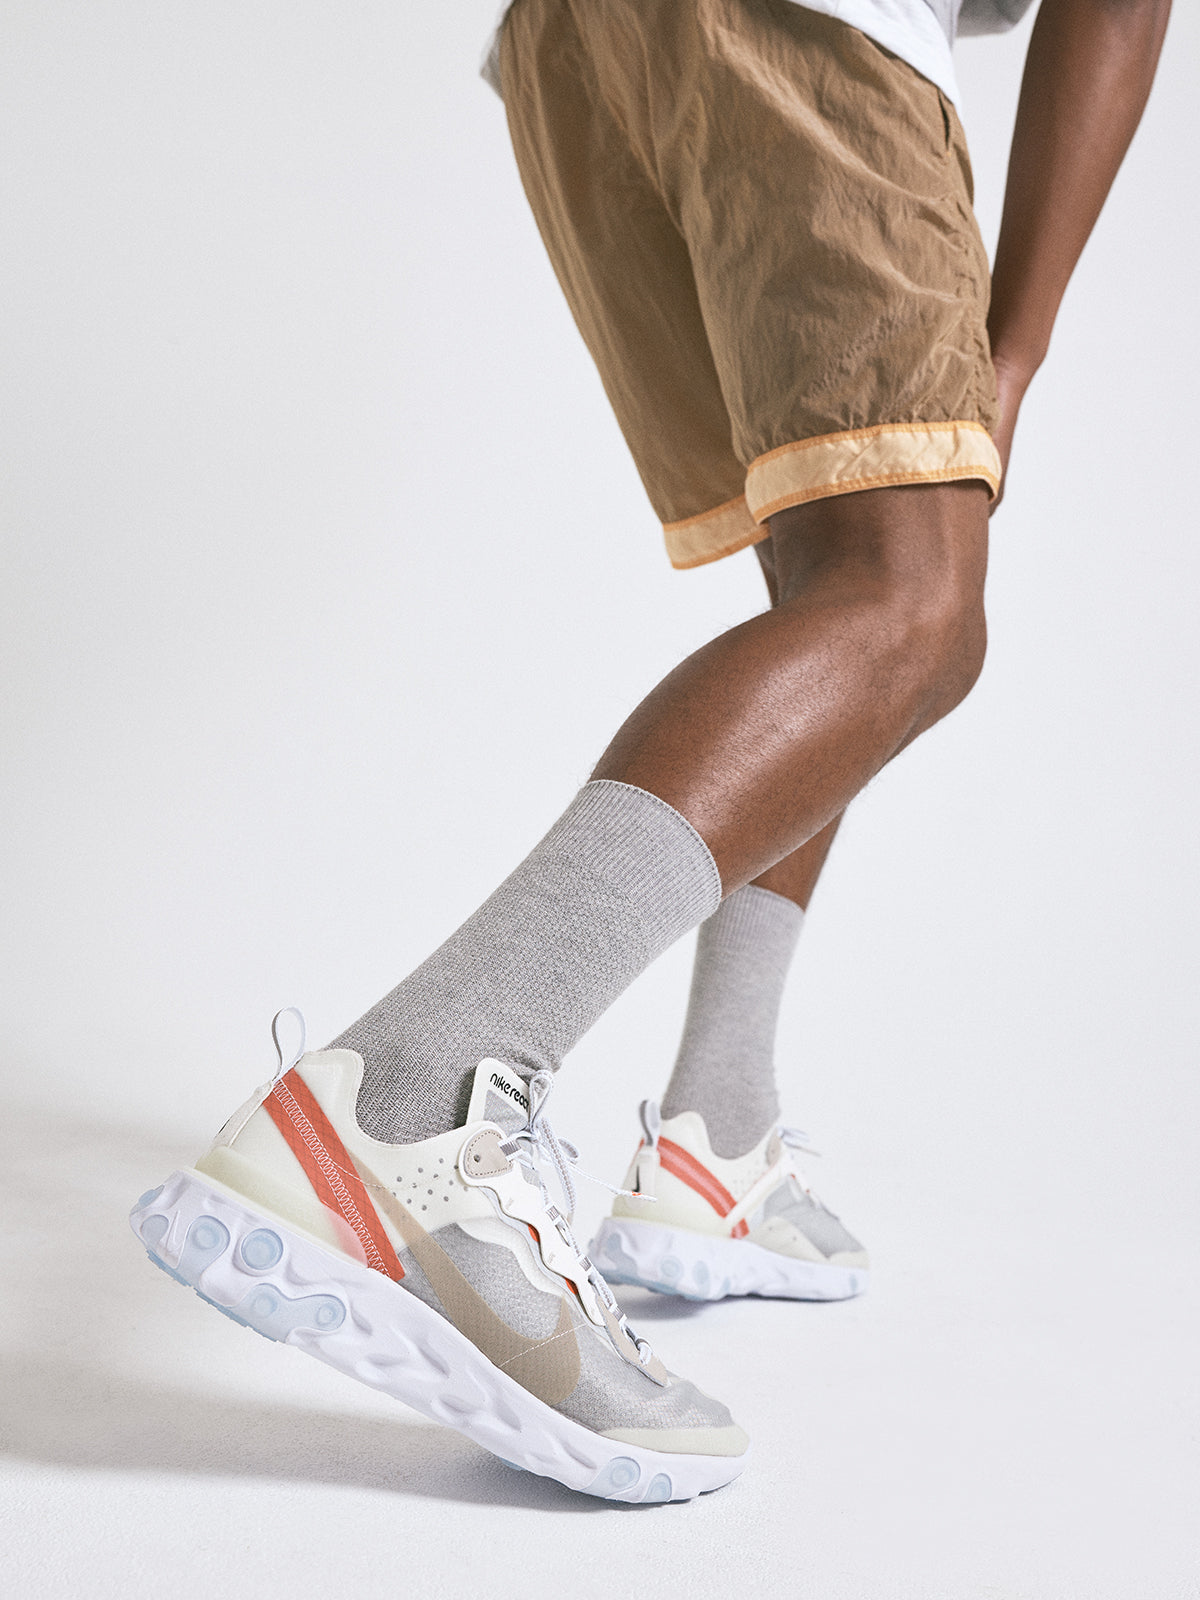 Kith Editorial for the Nike React Element 87